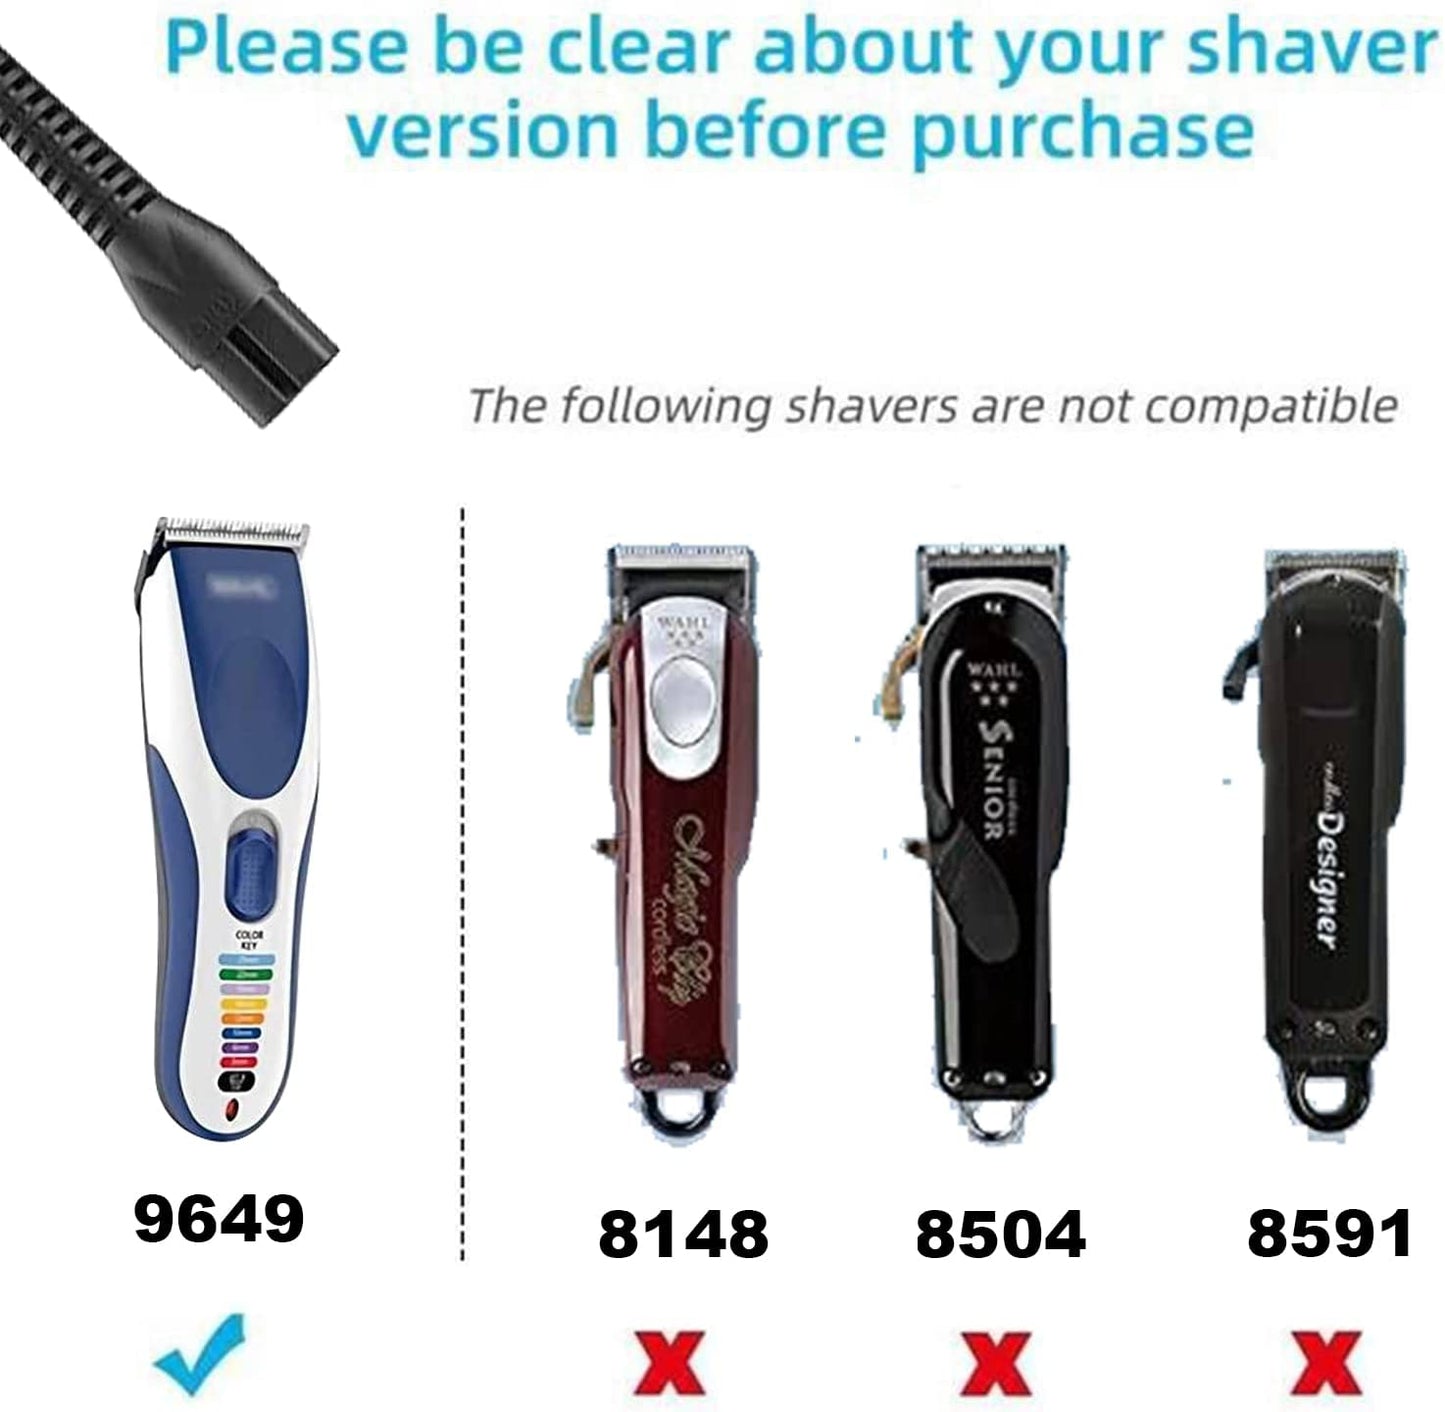 9649 Hair Clipper Charger, AC Power Adapter for Wahl 9649 Color Pro Cordless Rechargeable Hair Clipper & Trimmer. Only Fit 9649